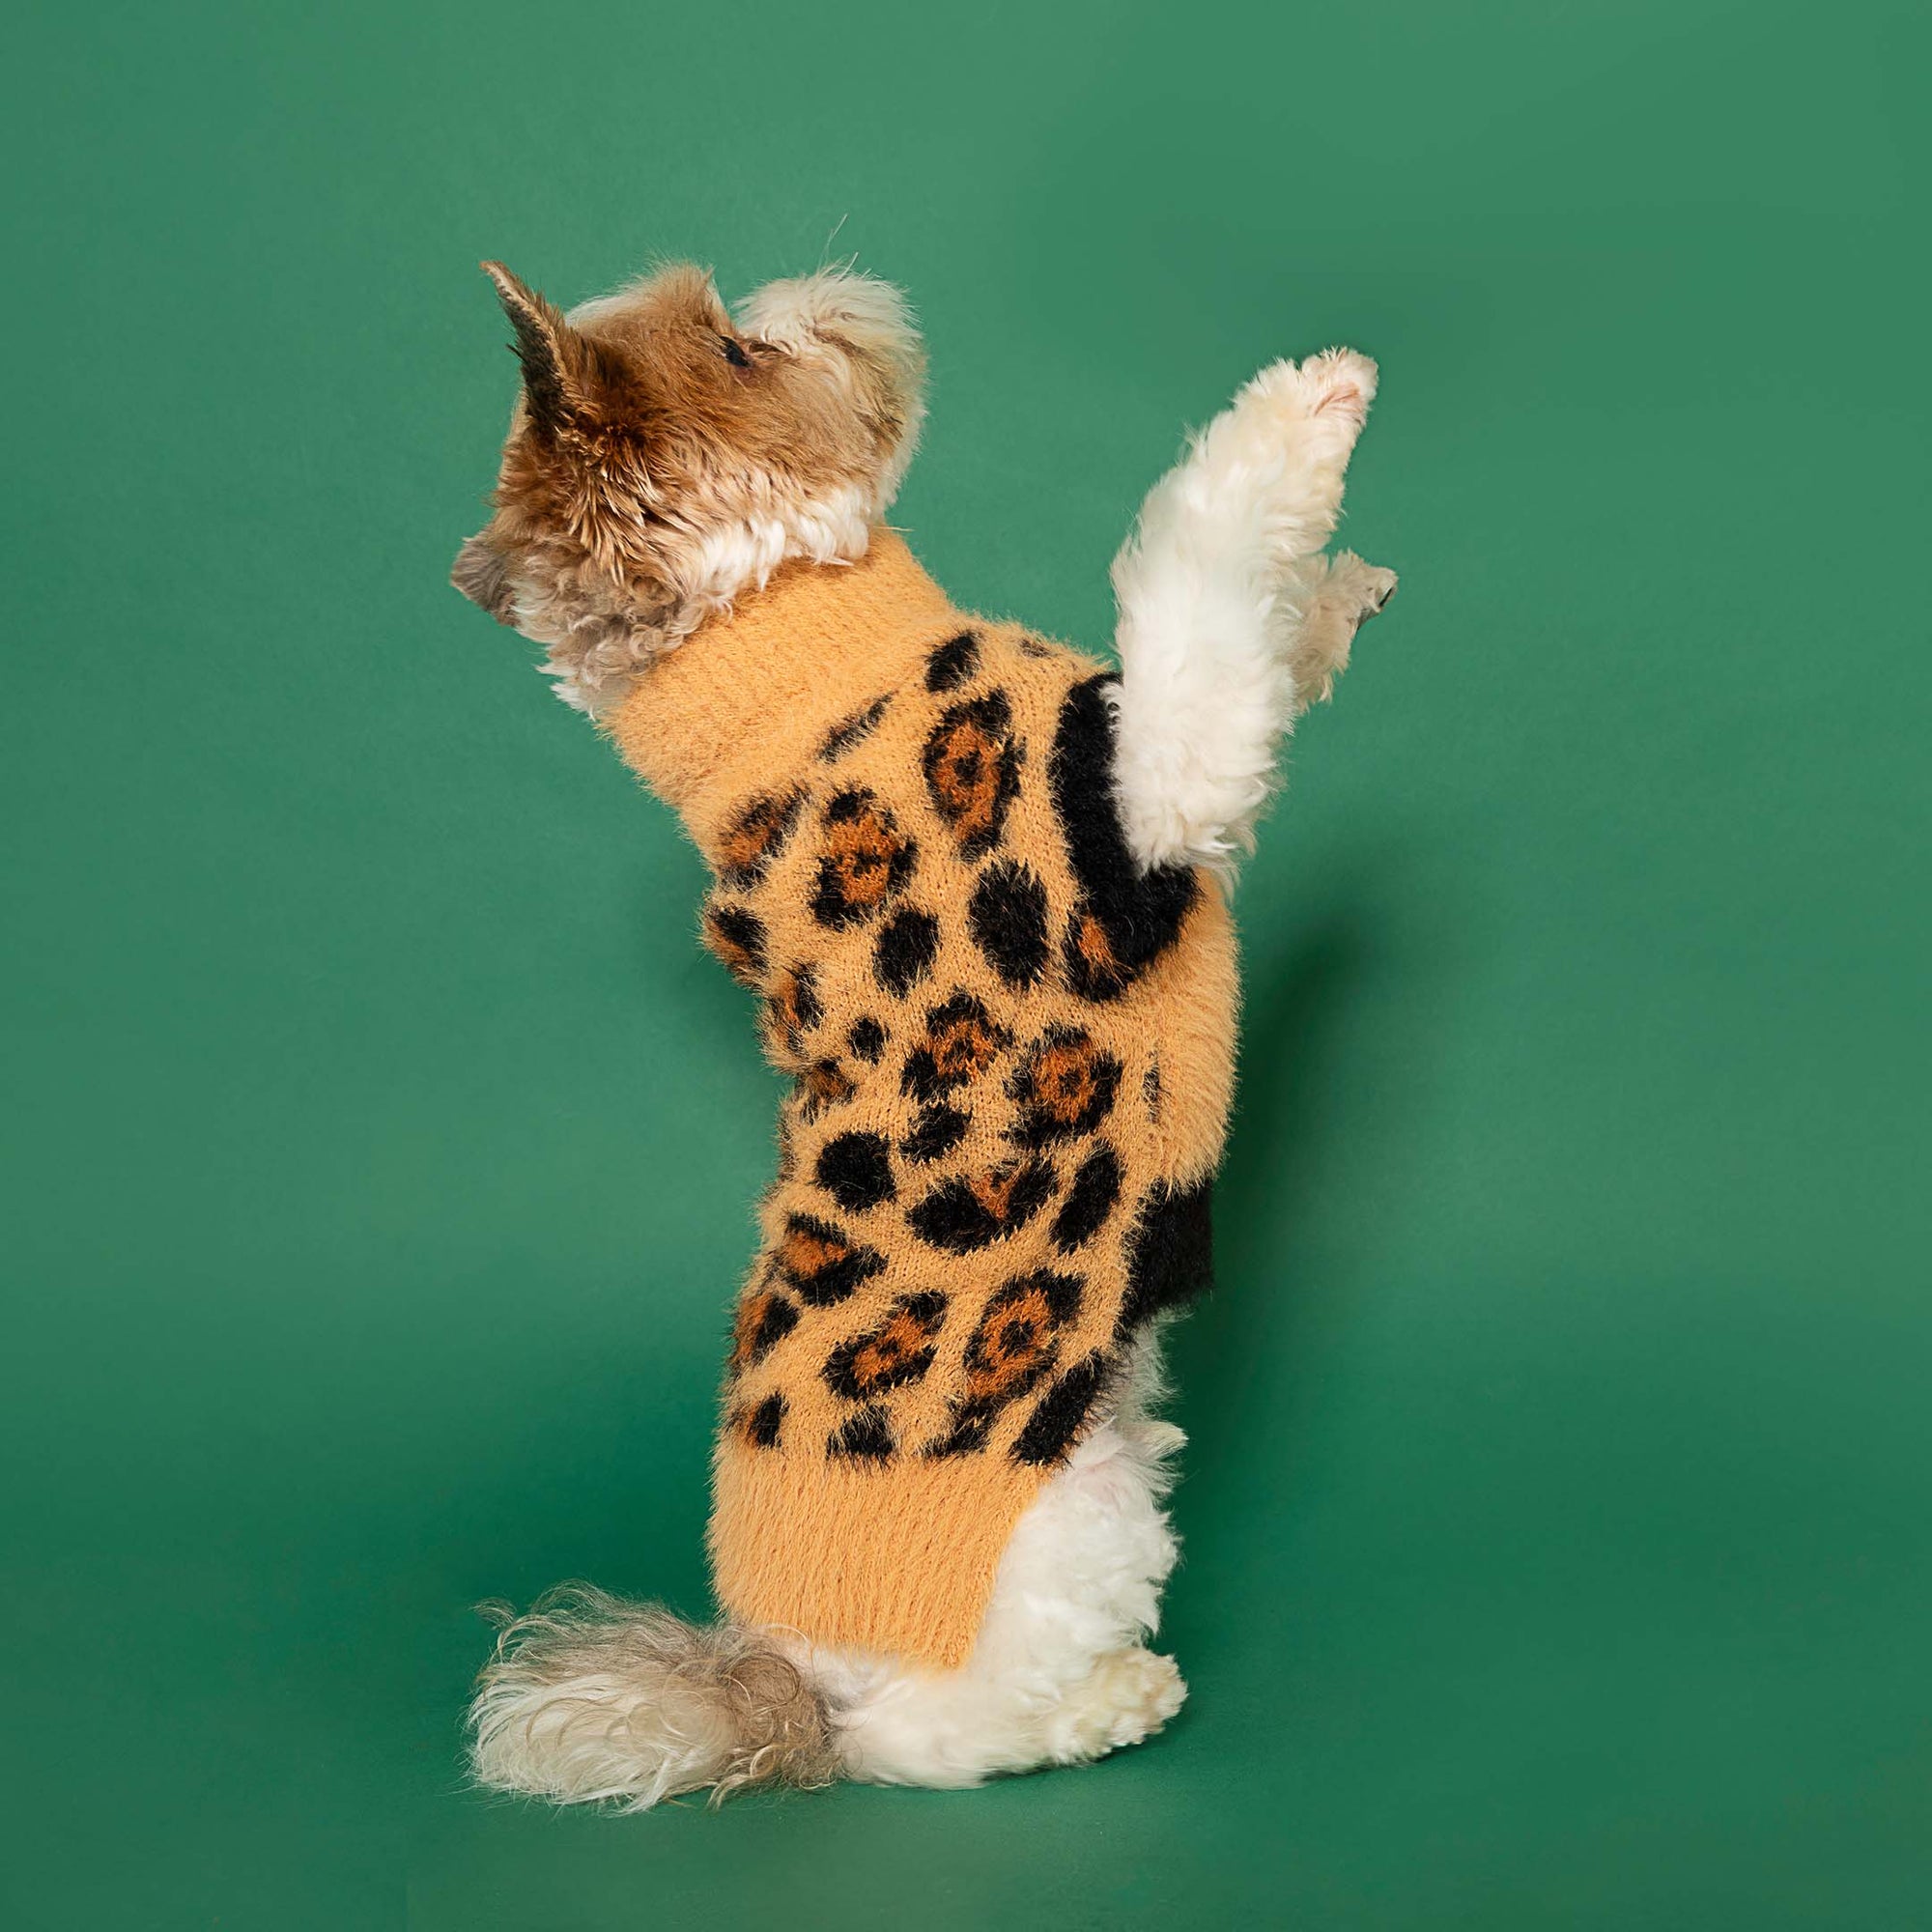 Small dog standing on hind legs, clad in a tan sweater with leopard print, against a vibrant green background, showcasing a playful stance.